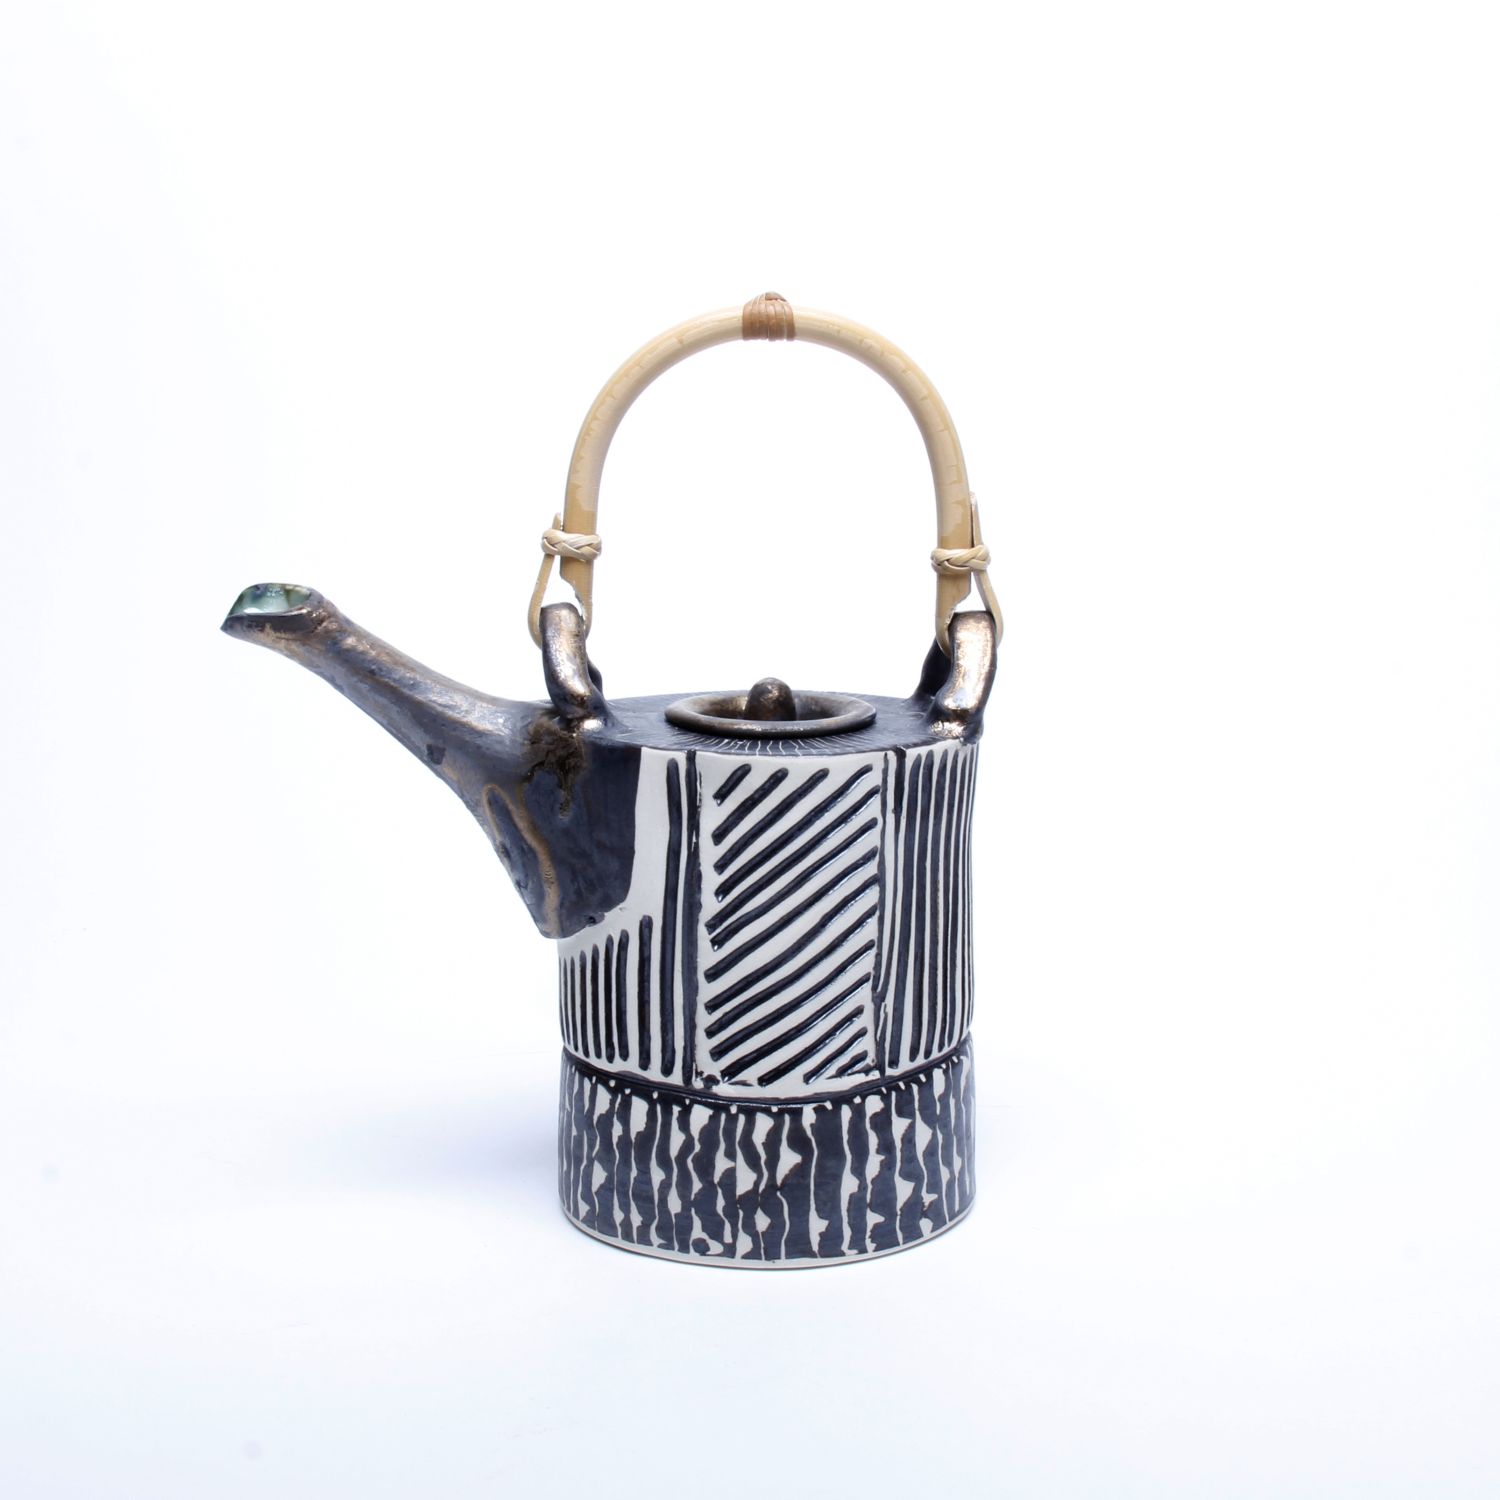 Jane Wilson: Teapot (Each sold separately) Product Image 3 of 4